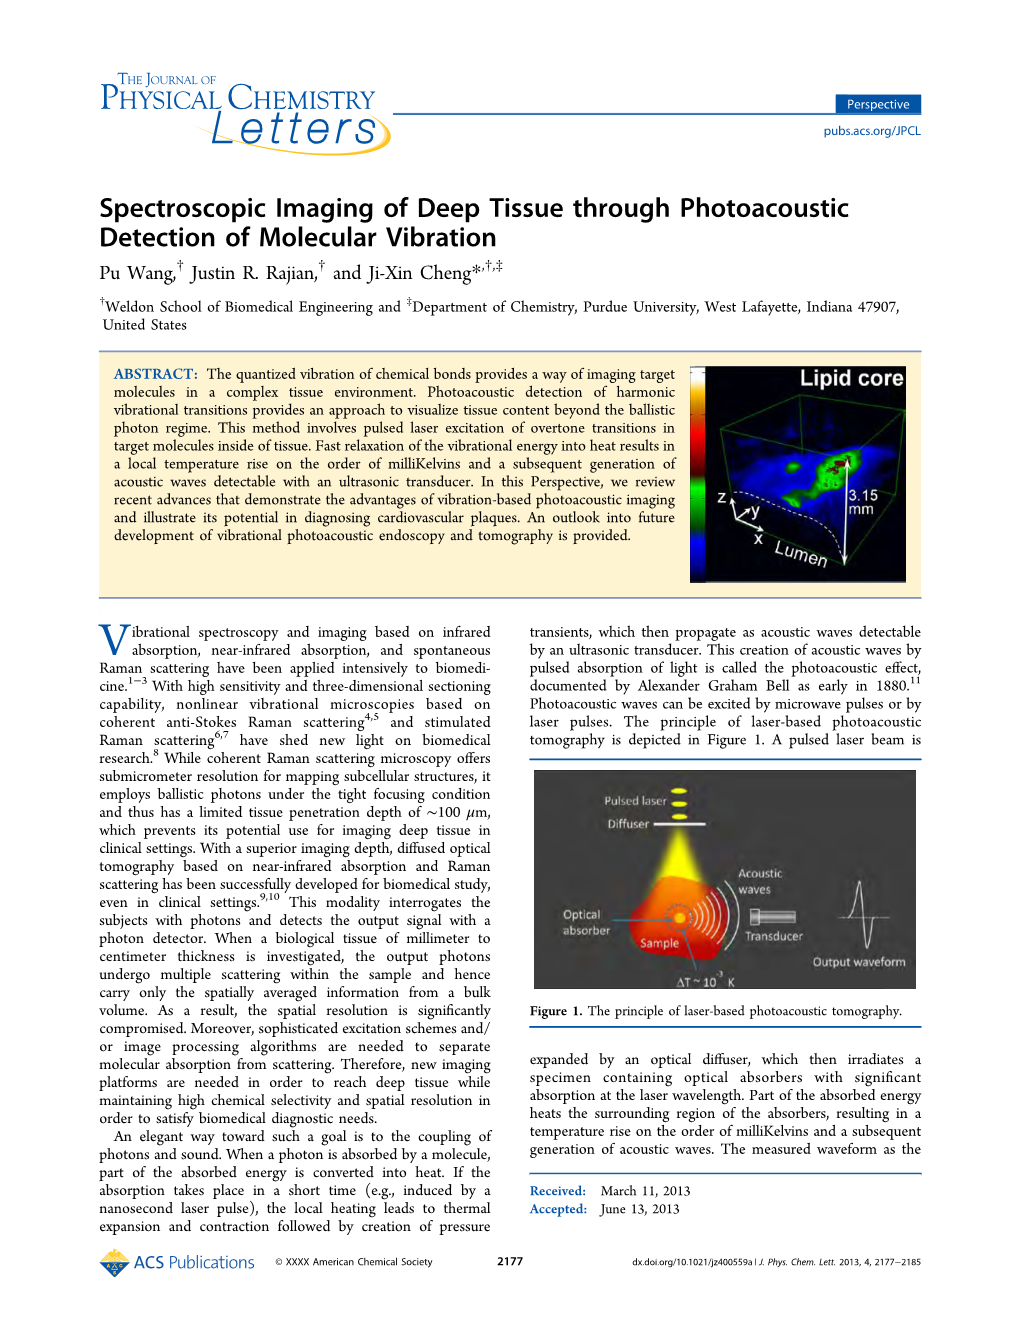 Spectroscopic Imaging of Deep Tissue Through Photoacoustic Detection of Molecular Vibration † † † ‡ Pu Wang, Justin R